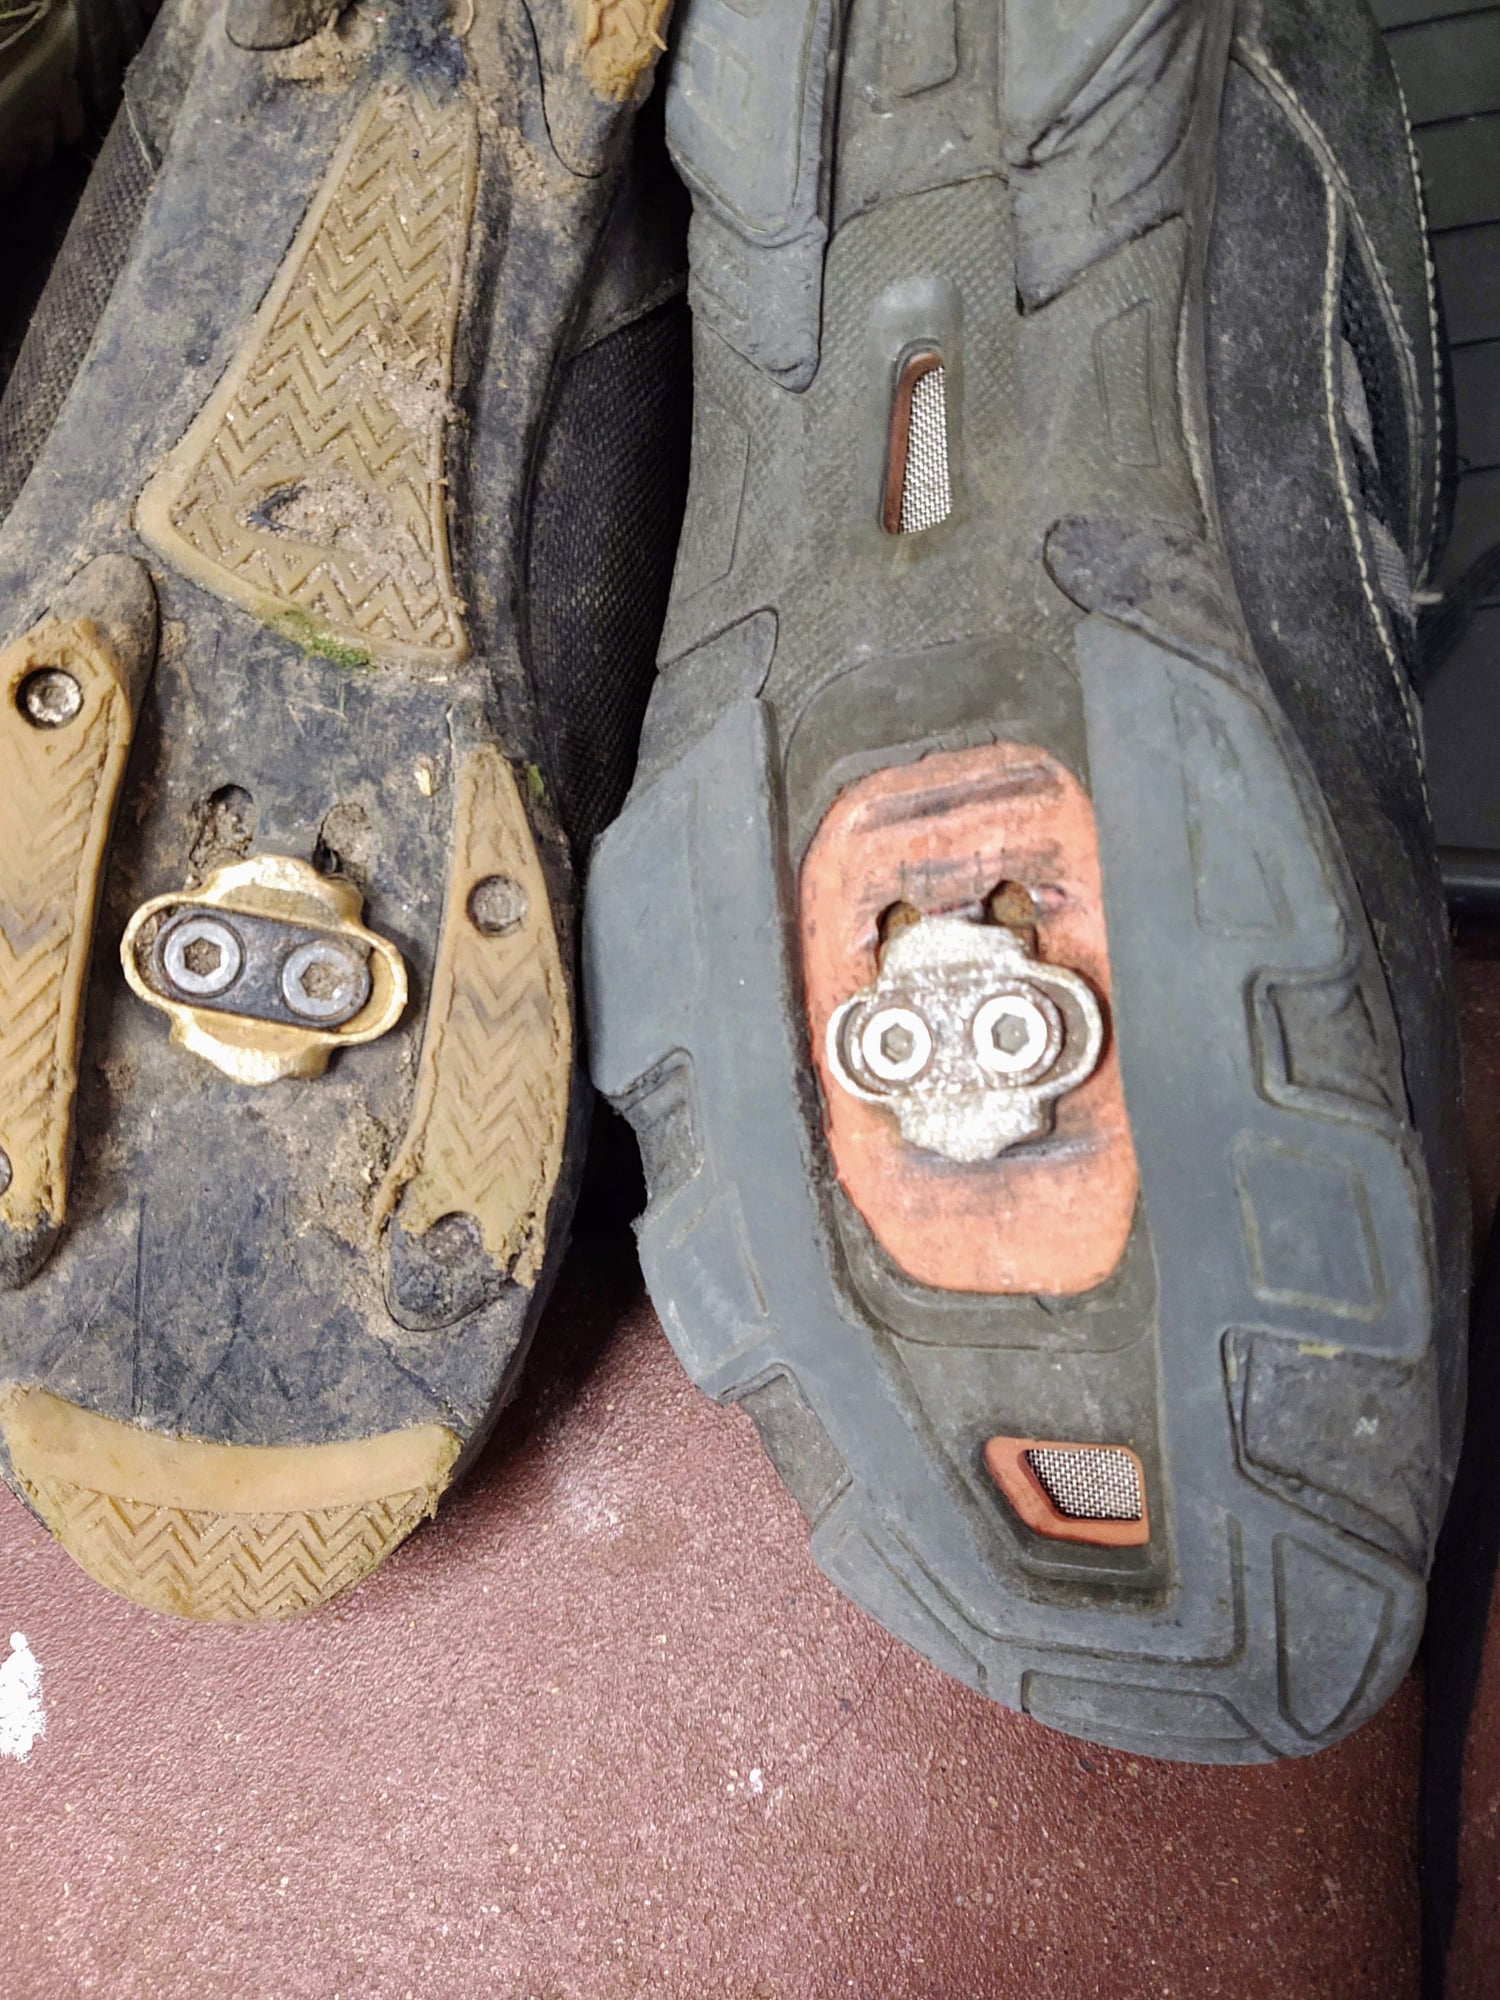 Pedals and shoes - Bike Forums